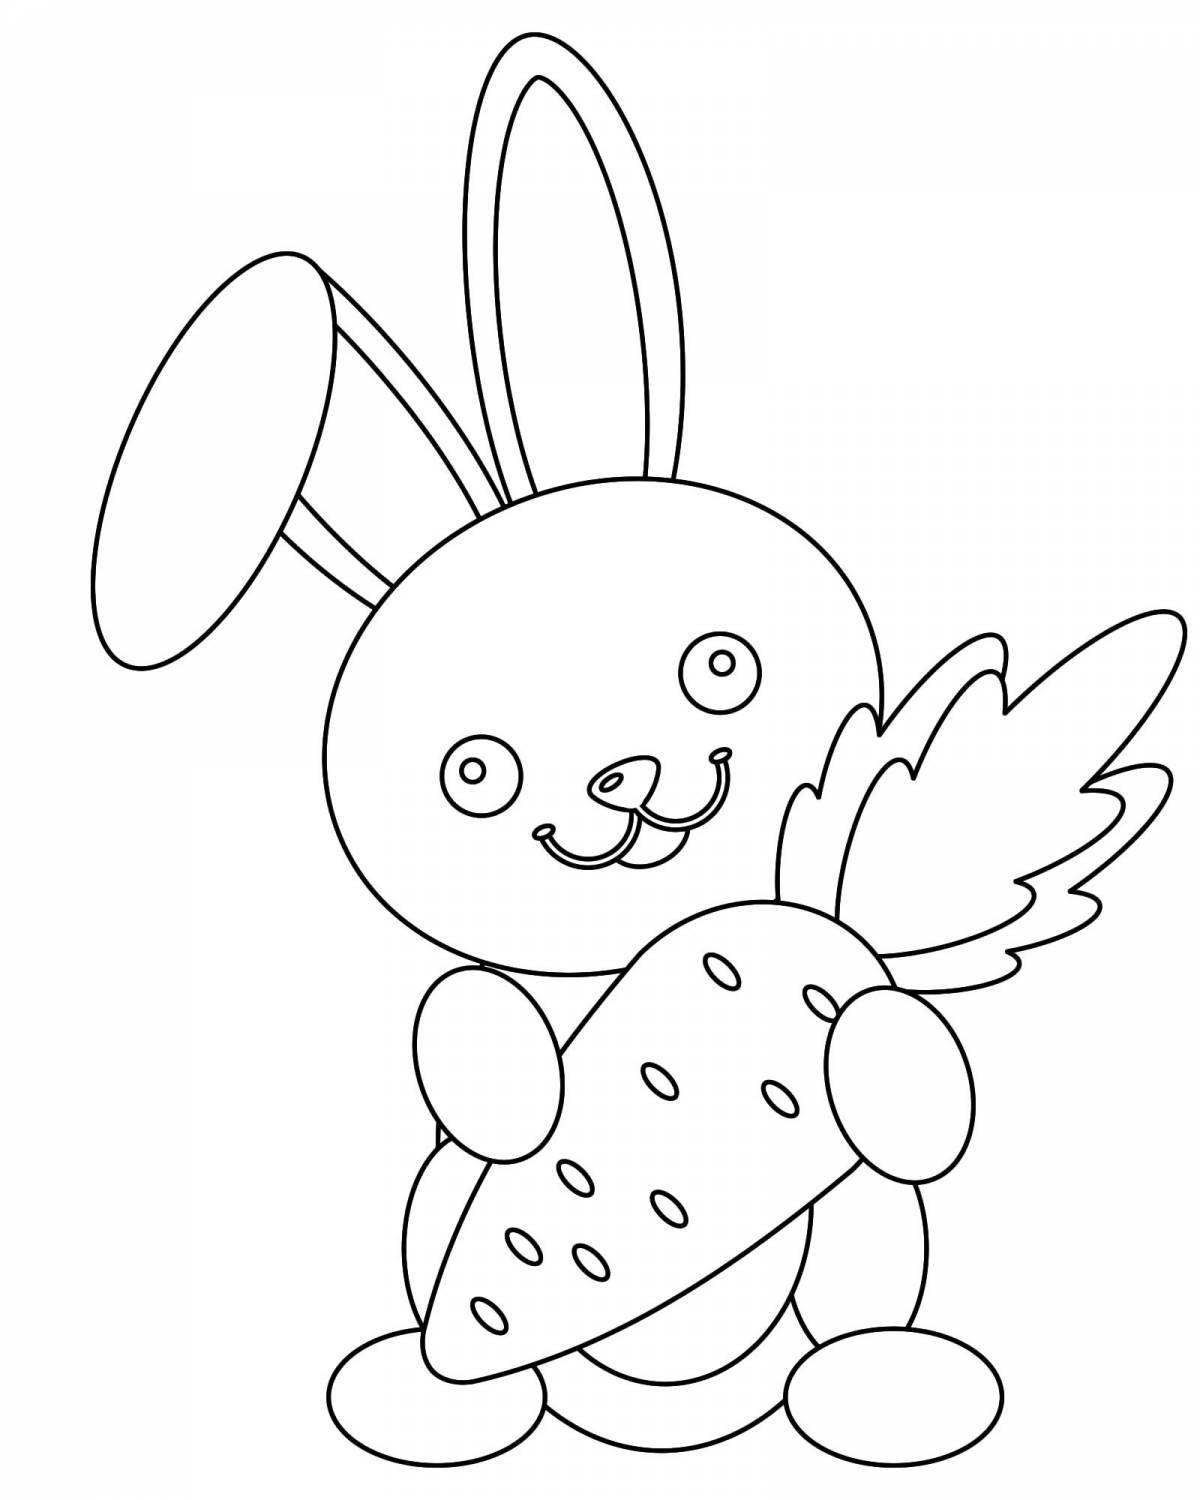 Happy coloring page bunny with carrot for kids